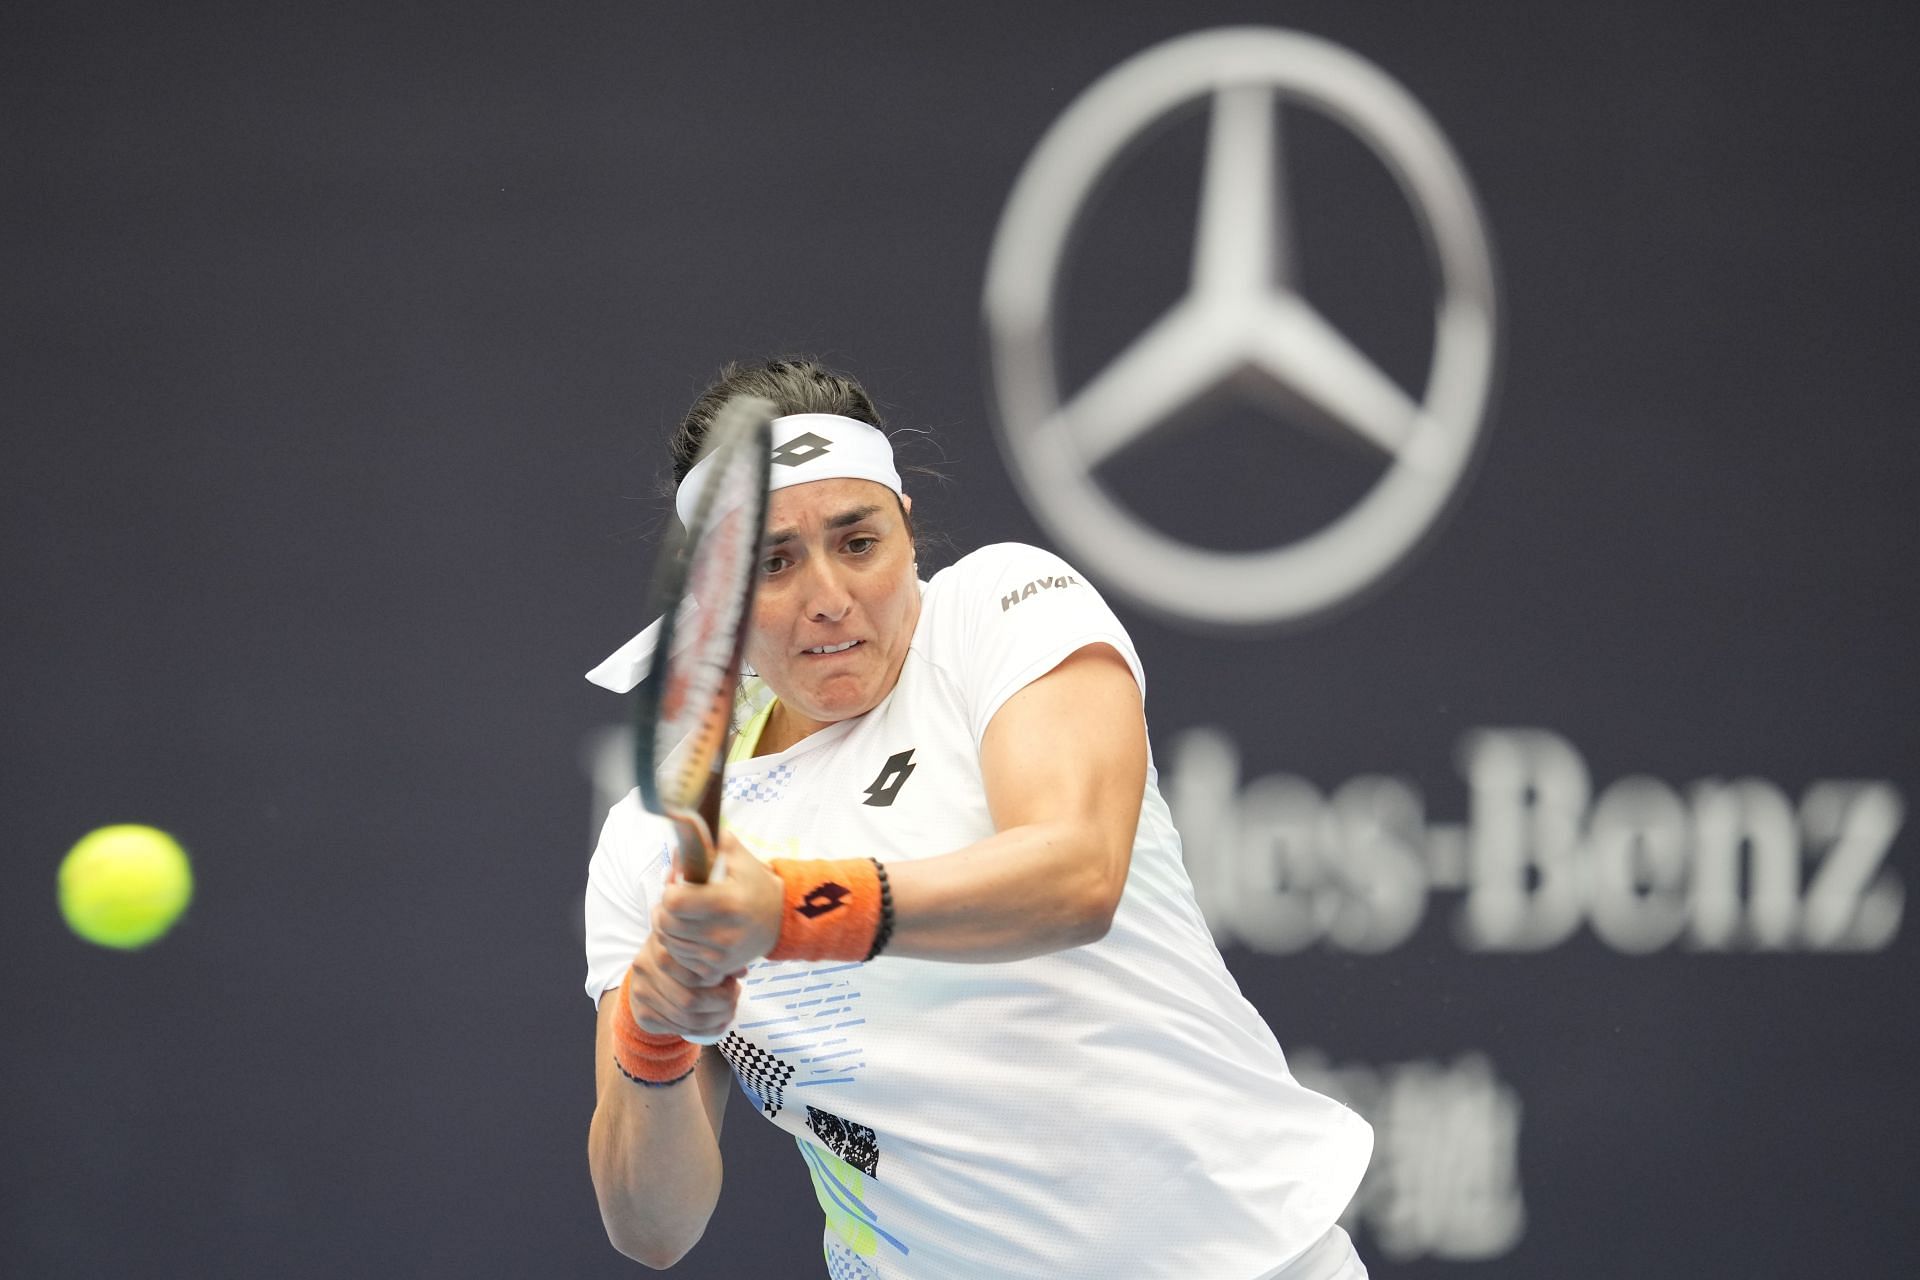 Ons Jabeur is No. 4 seed at the 2023 Zhengzhou Open